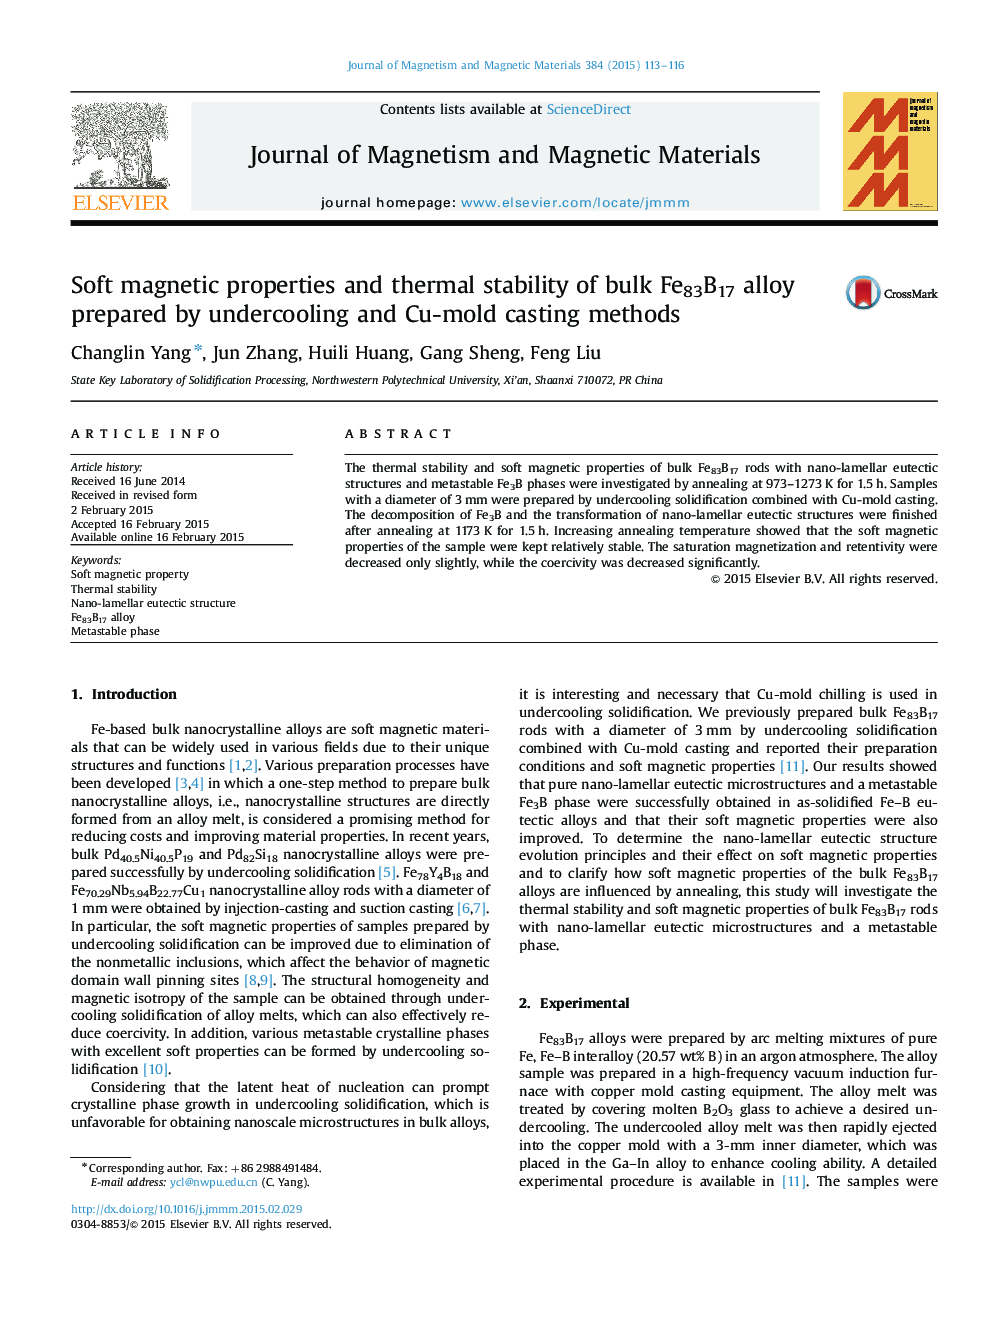 Soft magnetic properties and thermal stability of bulk Fe83B17 alloy prepared by undercooling and Cu-mold casting methods